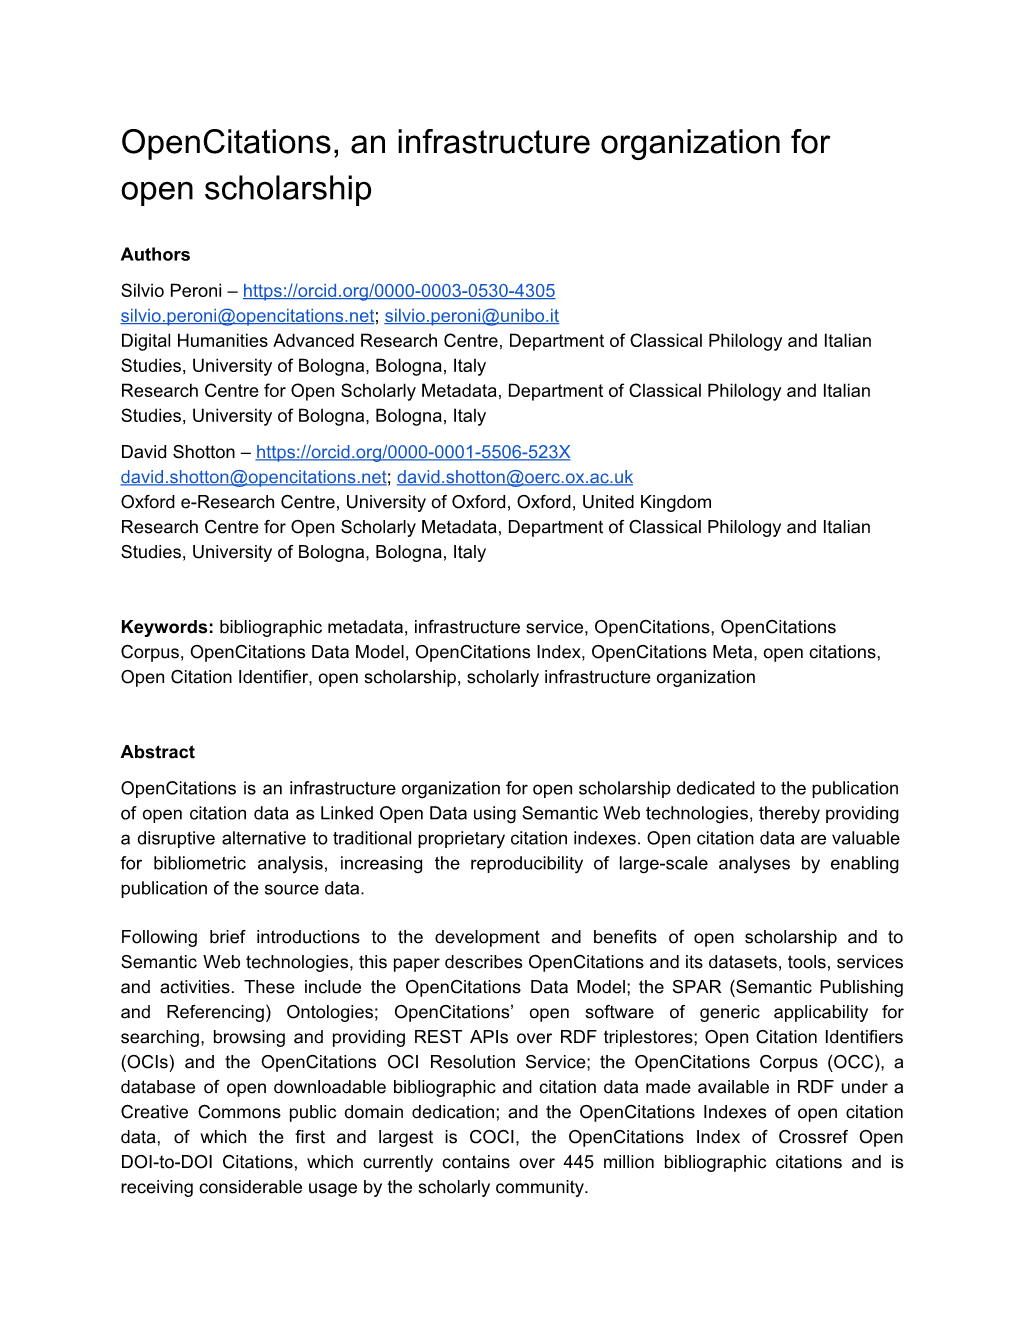 Opencitations, an Infrastructure Organization for Open Scholarship